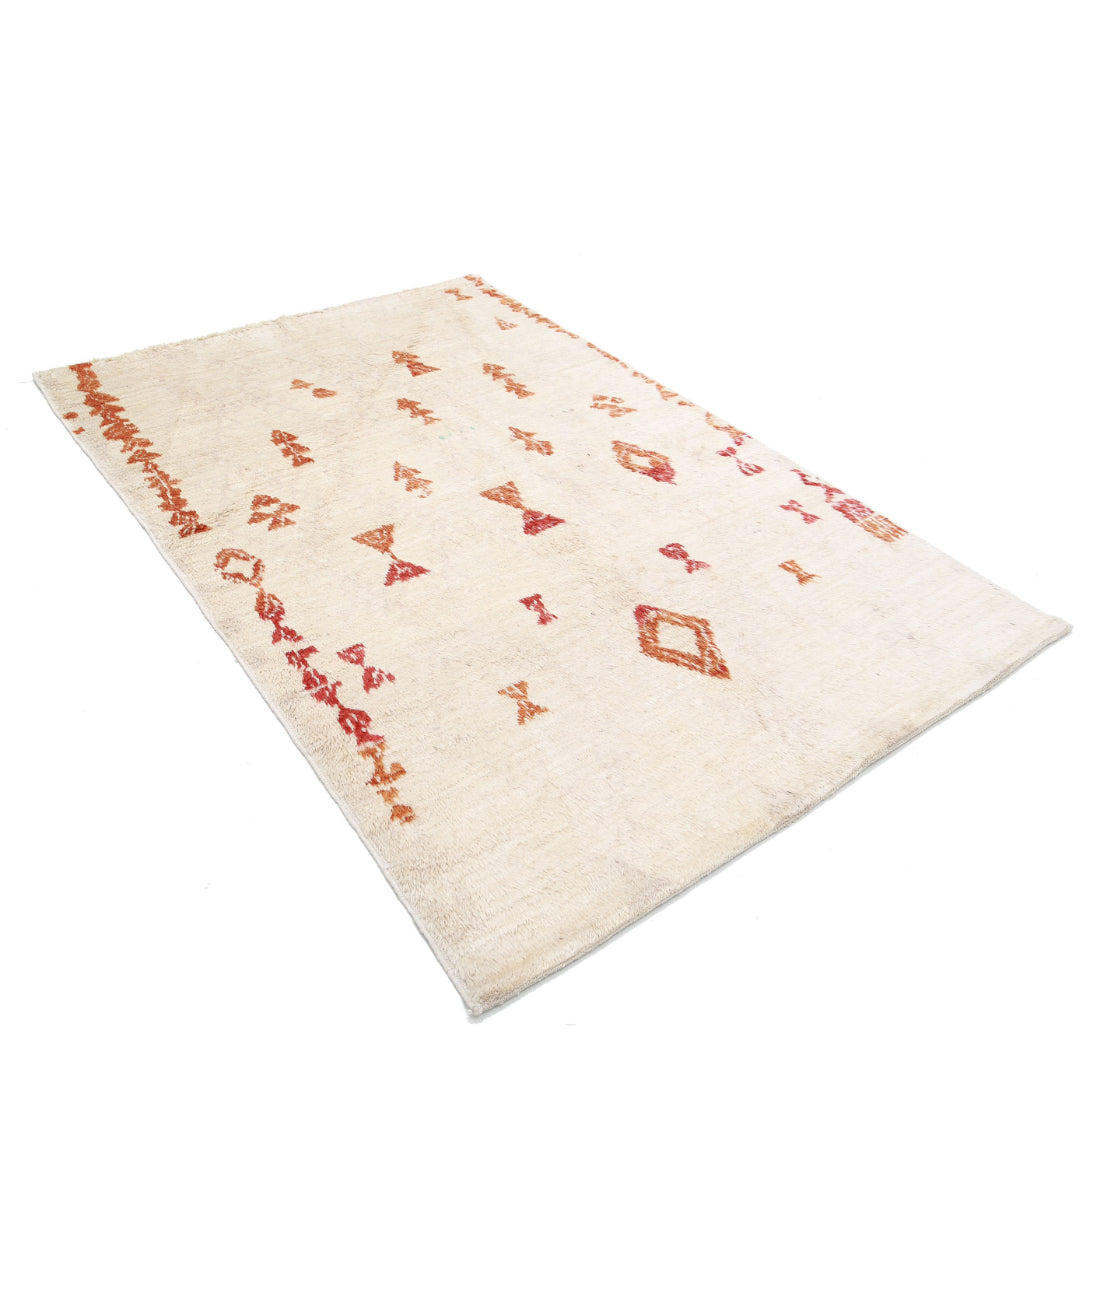 Hand Knotted Tribal Moroccan Wool Rug - 5'2'' x 7'10'' 5'2'' x 7'10'' (155 X 235) / Ivory / Red